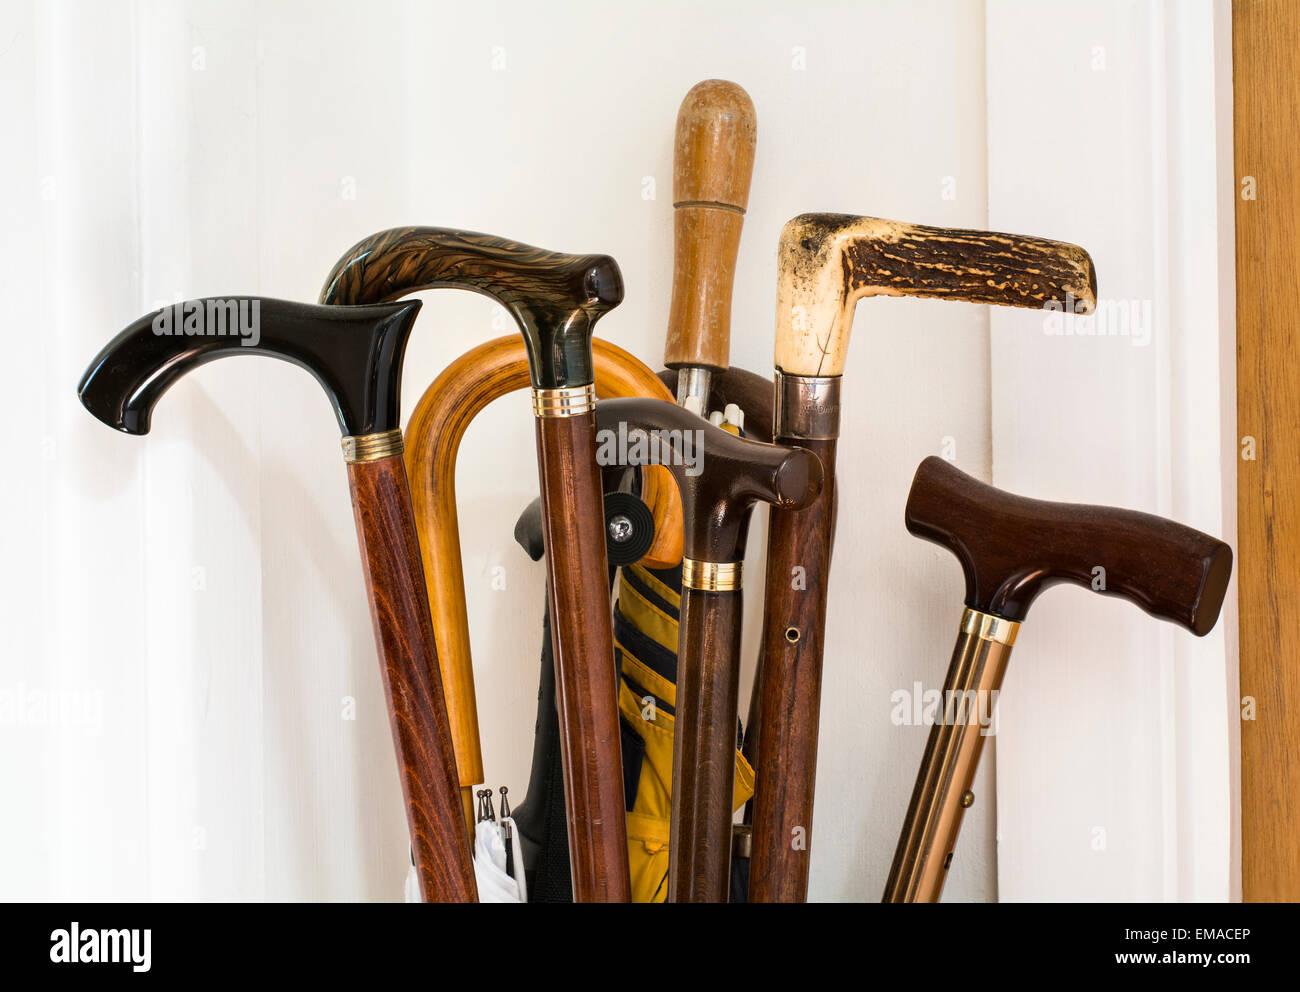 A selection of walking stick and umbrella handles Stock Photo